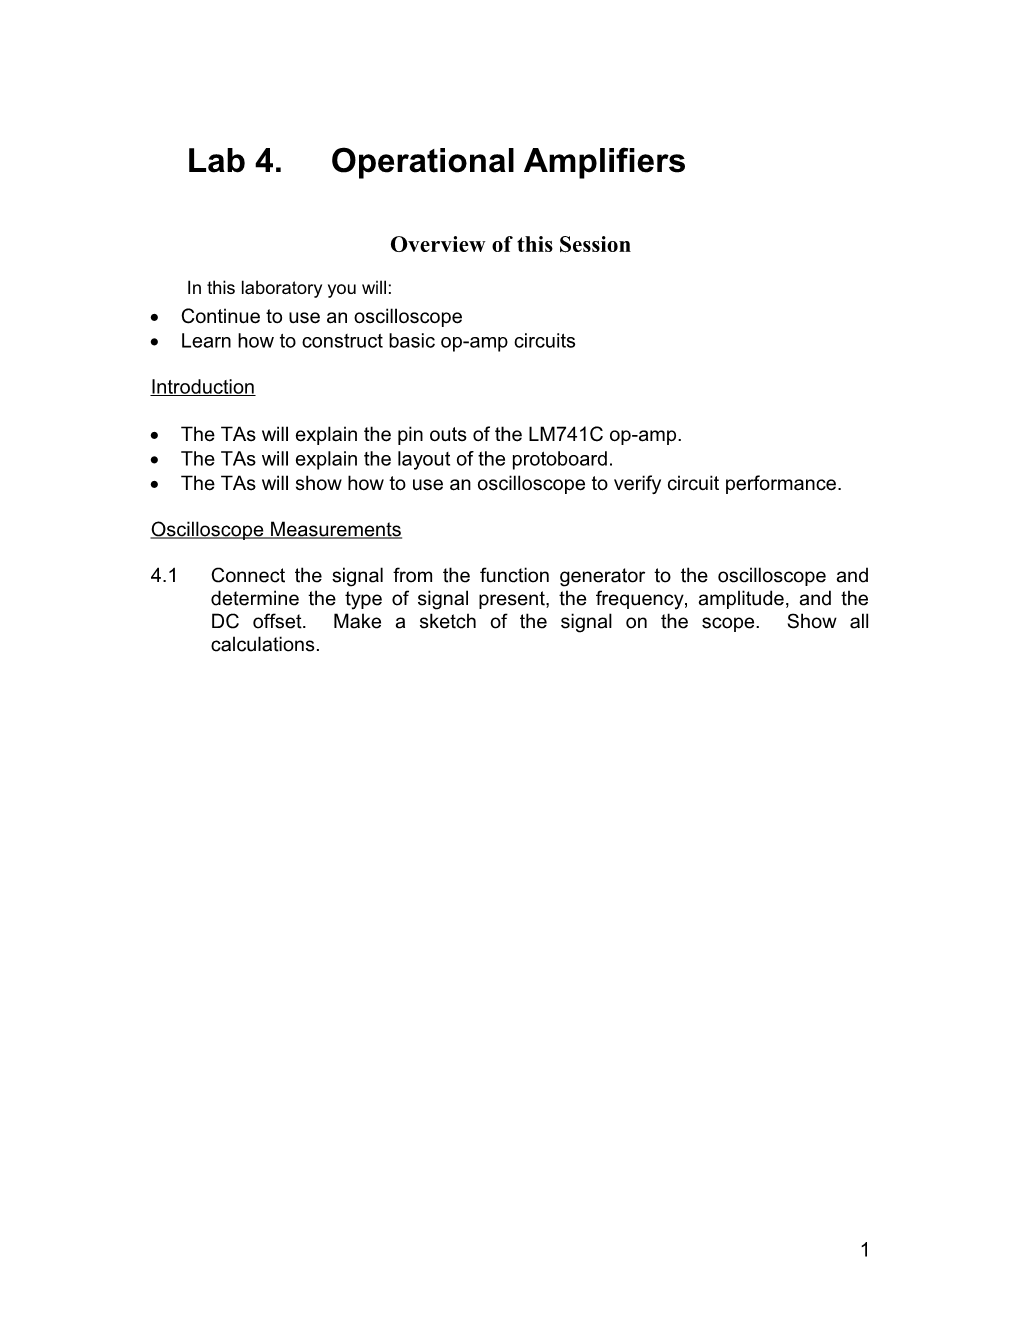 Lab 4.Operational Amplifiers